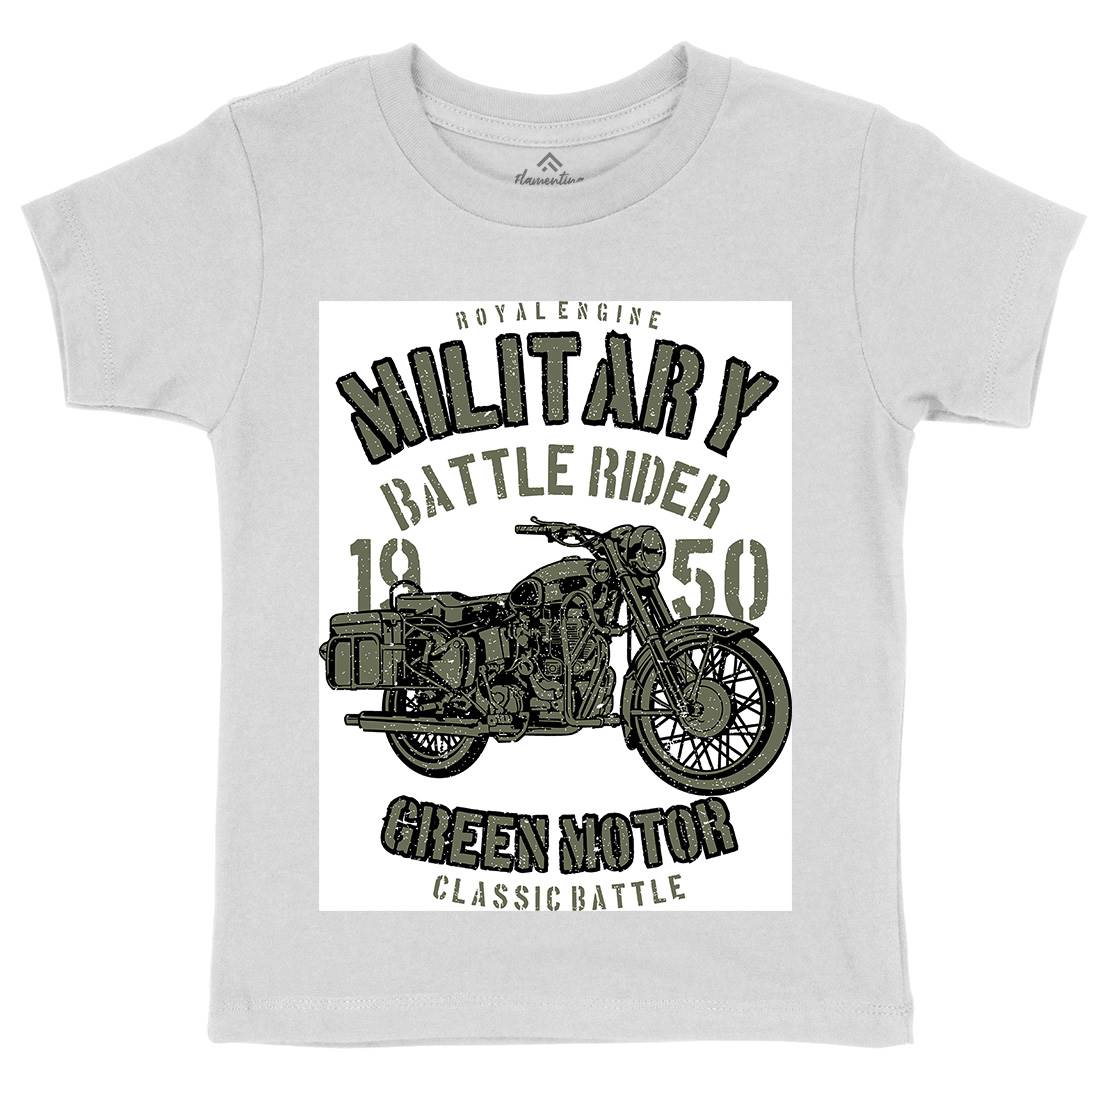 Green Military Ride Kids Crew Neck T-Shirt Army A678